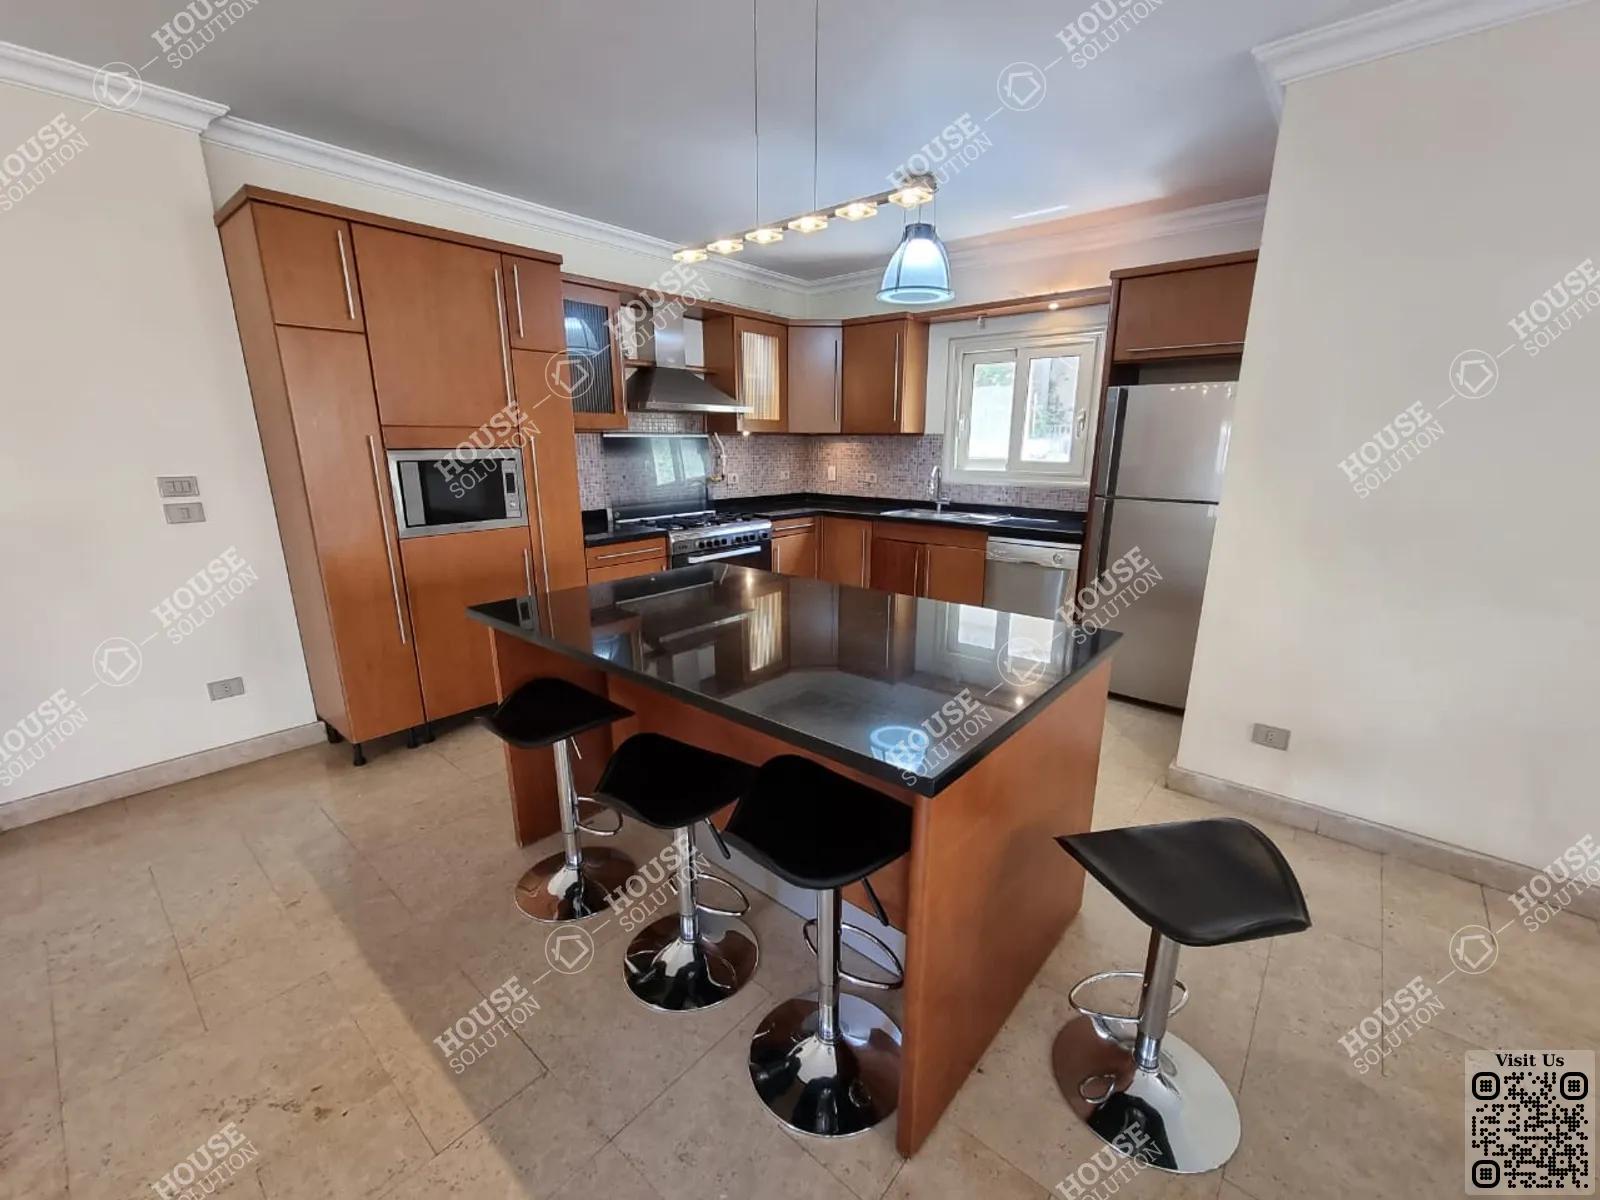 KITCHEN  @ Apartments For Rent In Maadi Maadi Sarayat Area: 240 m² consists of 3 Bedrooms 3 Bathrooms Modern furnished 5 stars #4964-1